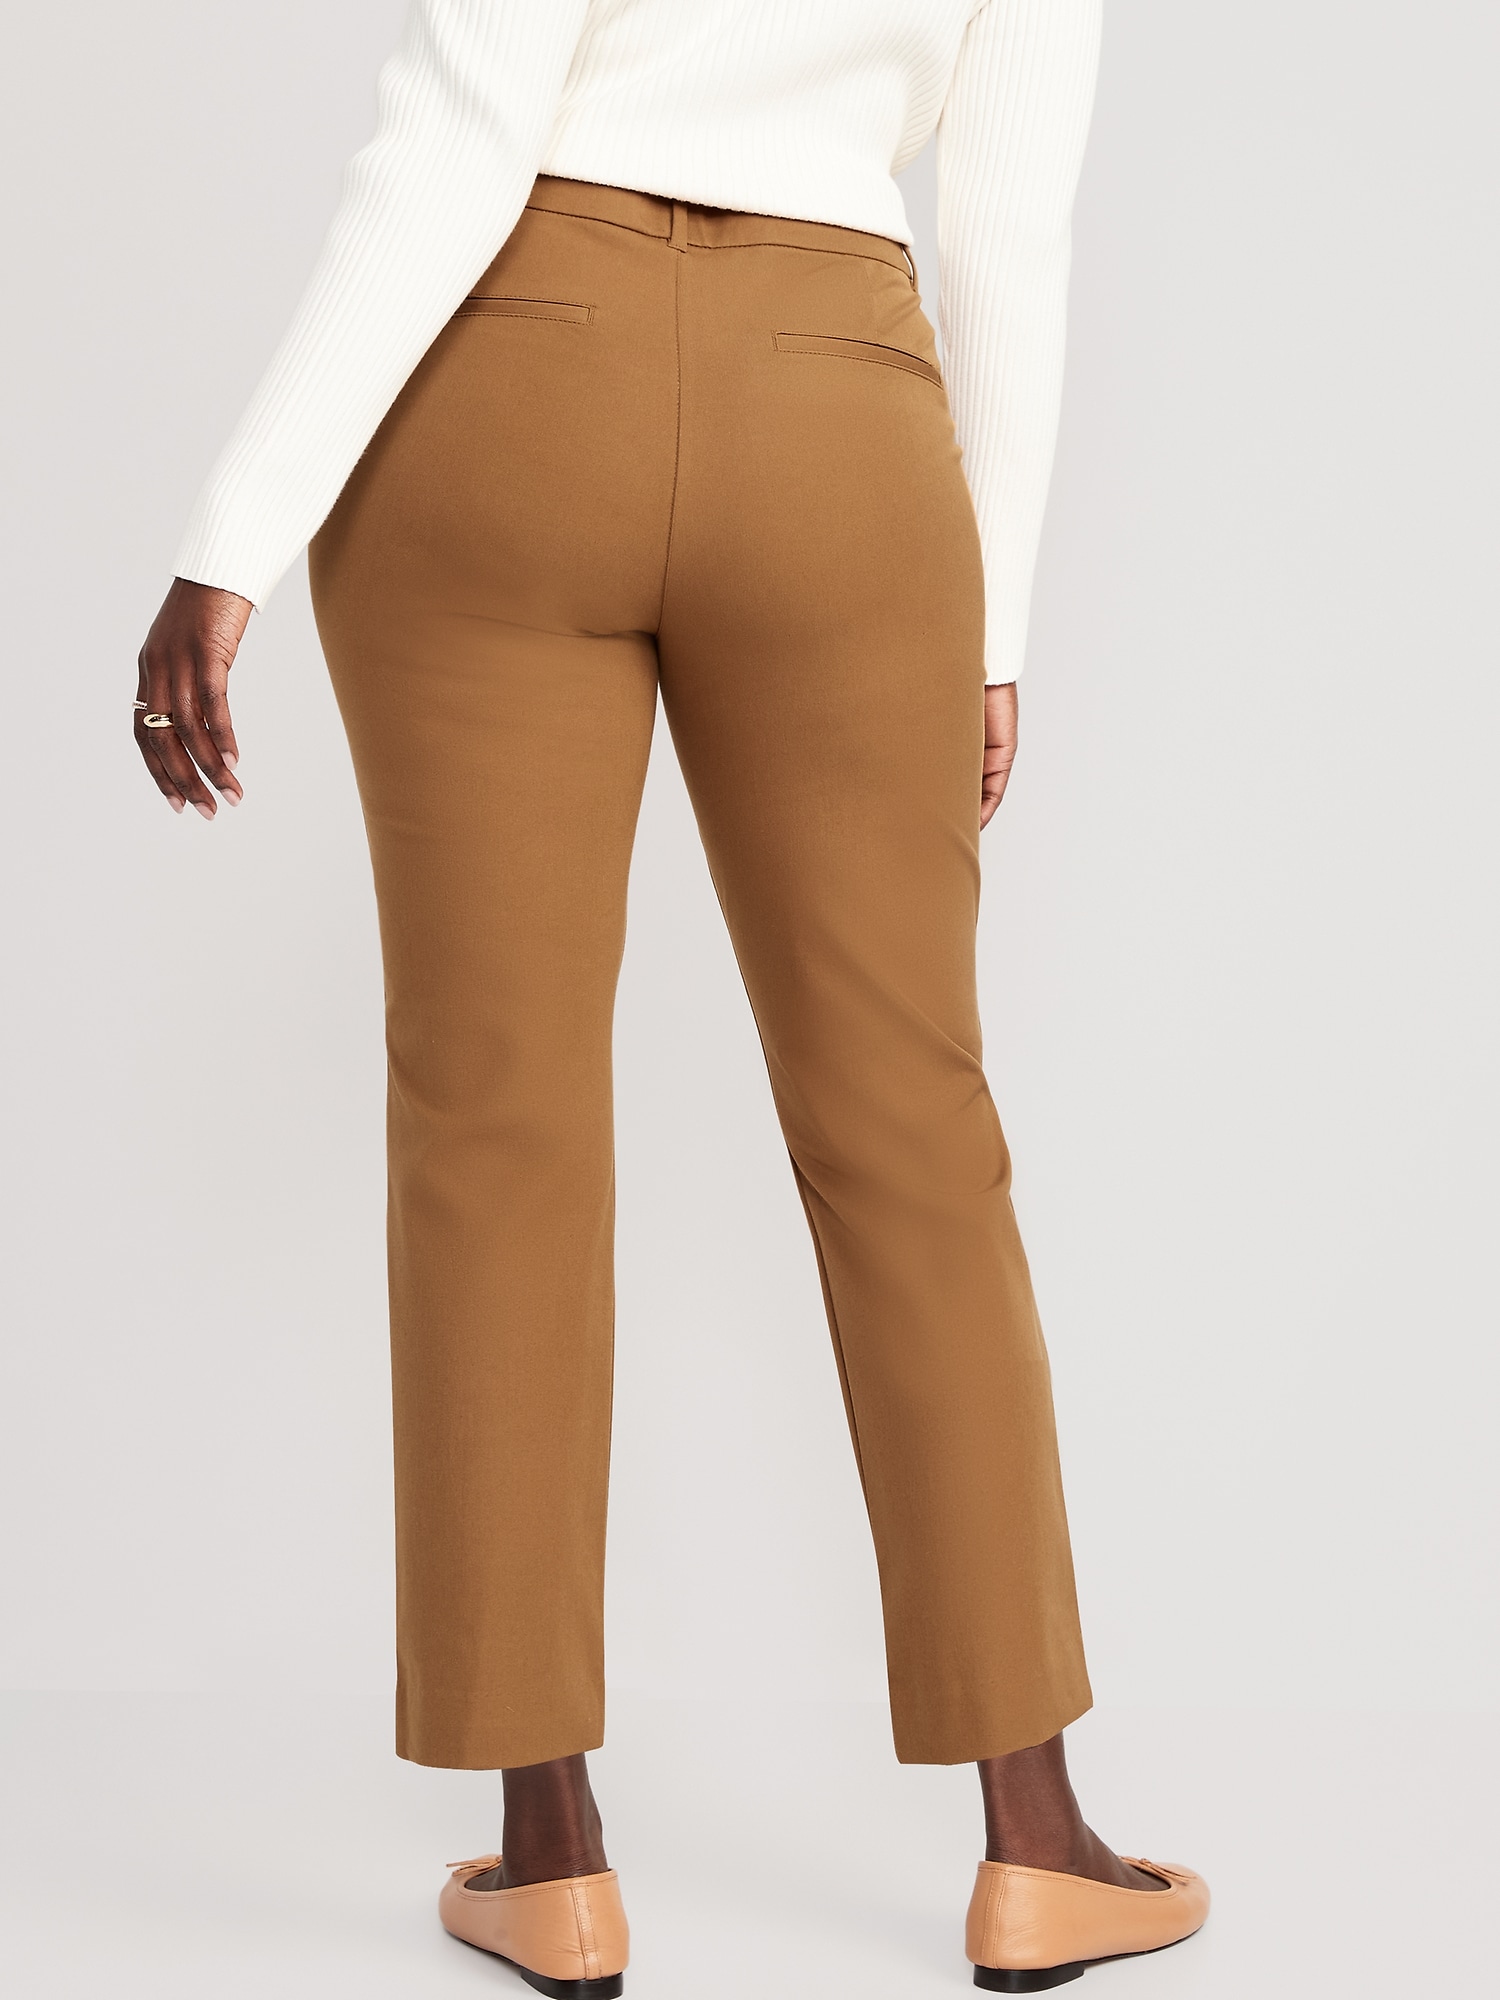 The Best Work Pants from Target - Brooke's Budget Beauty